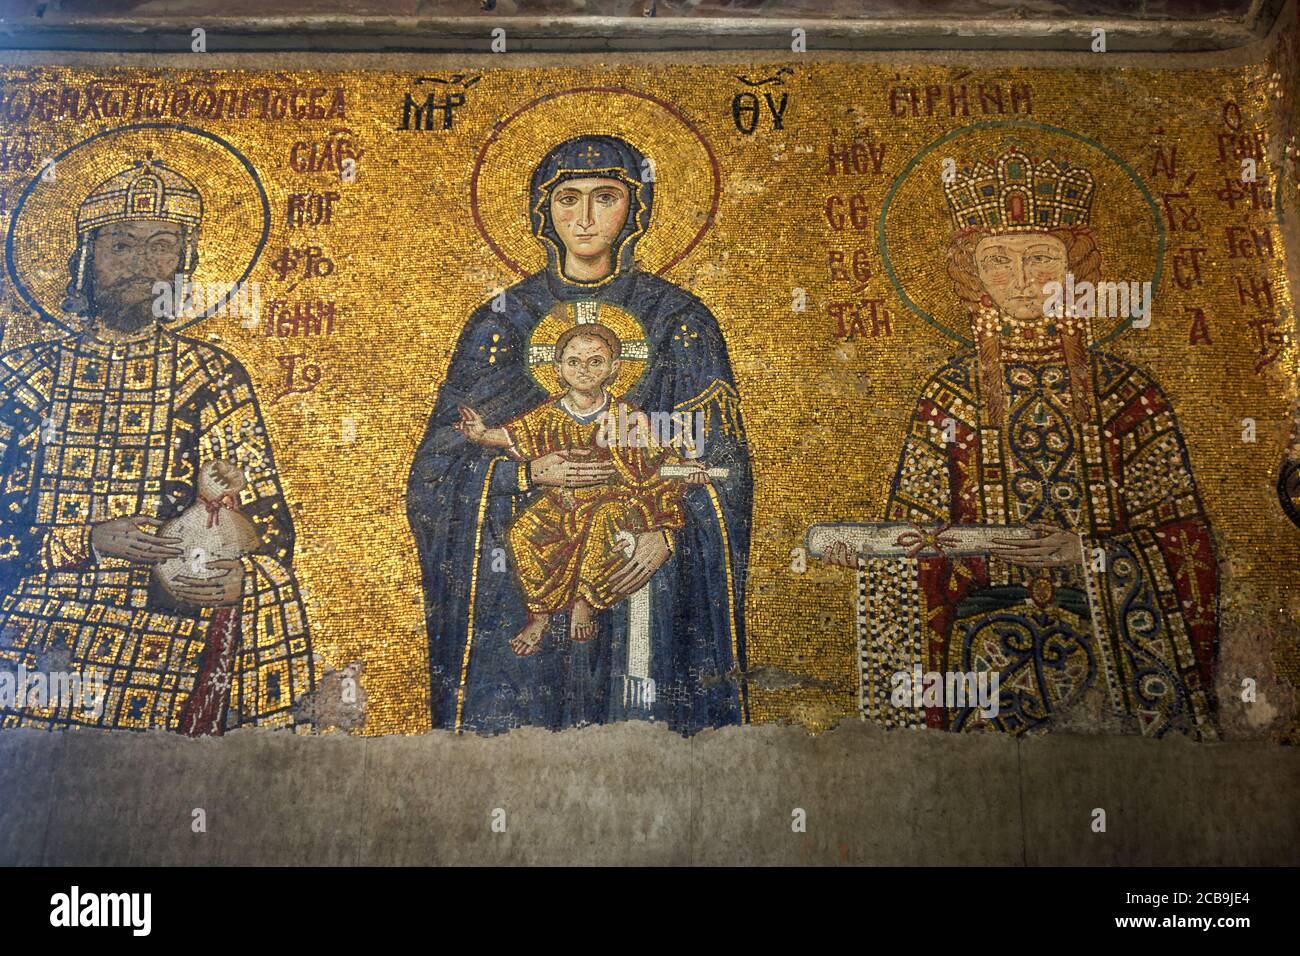 Central figure of Virgin Mary with infant Jesus in the Byzantine mosaic on the upper gallery inside Hagia Sophia. Istanbul. Turkey. Stock Photo